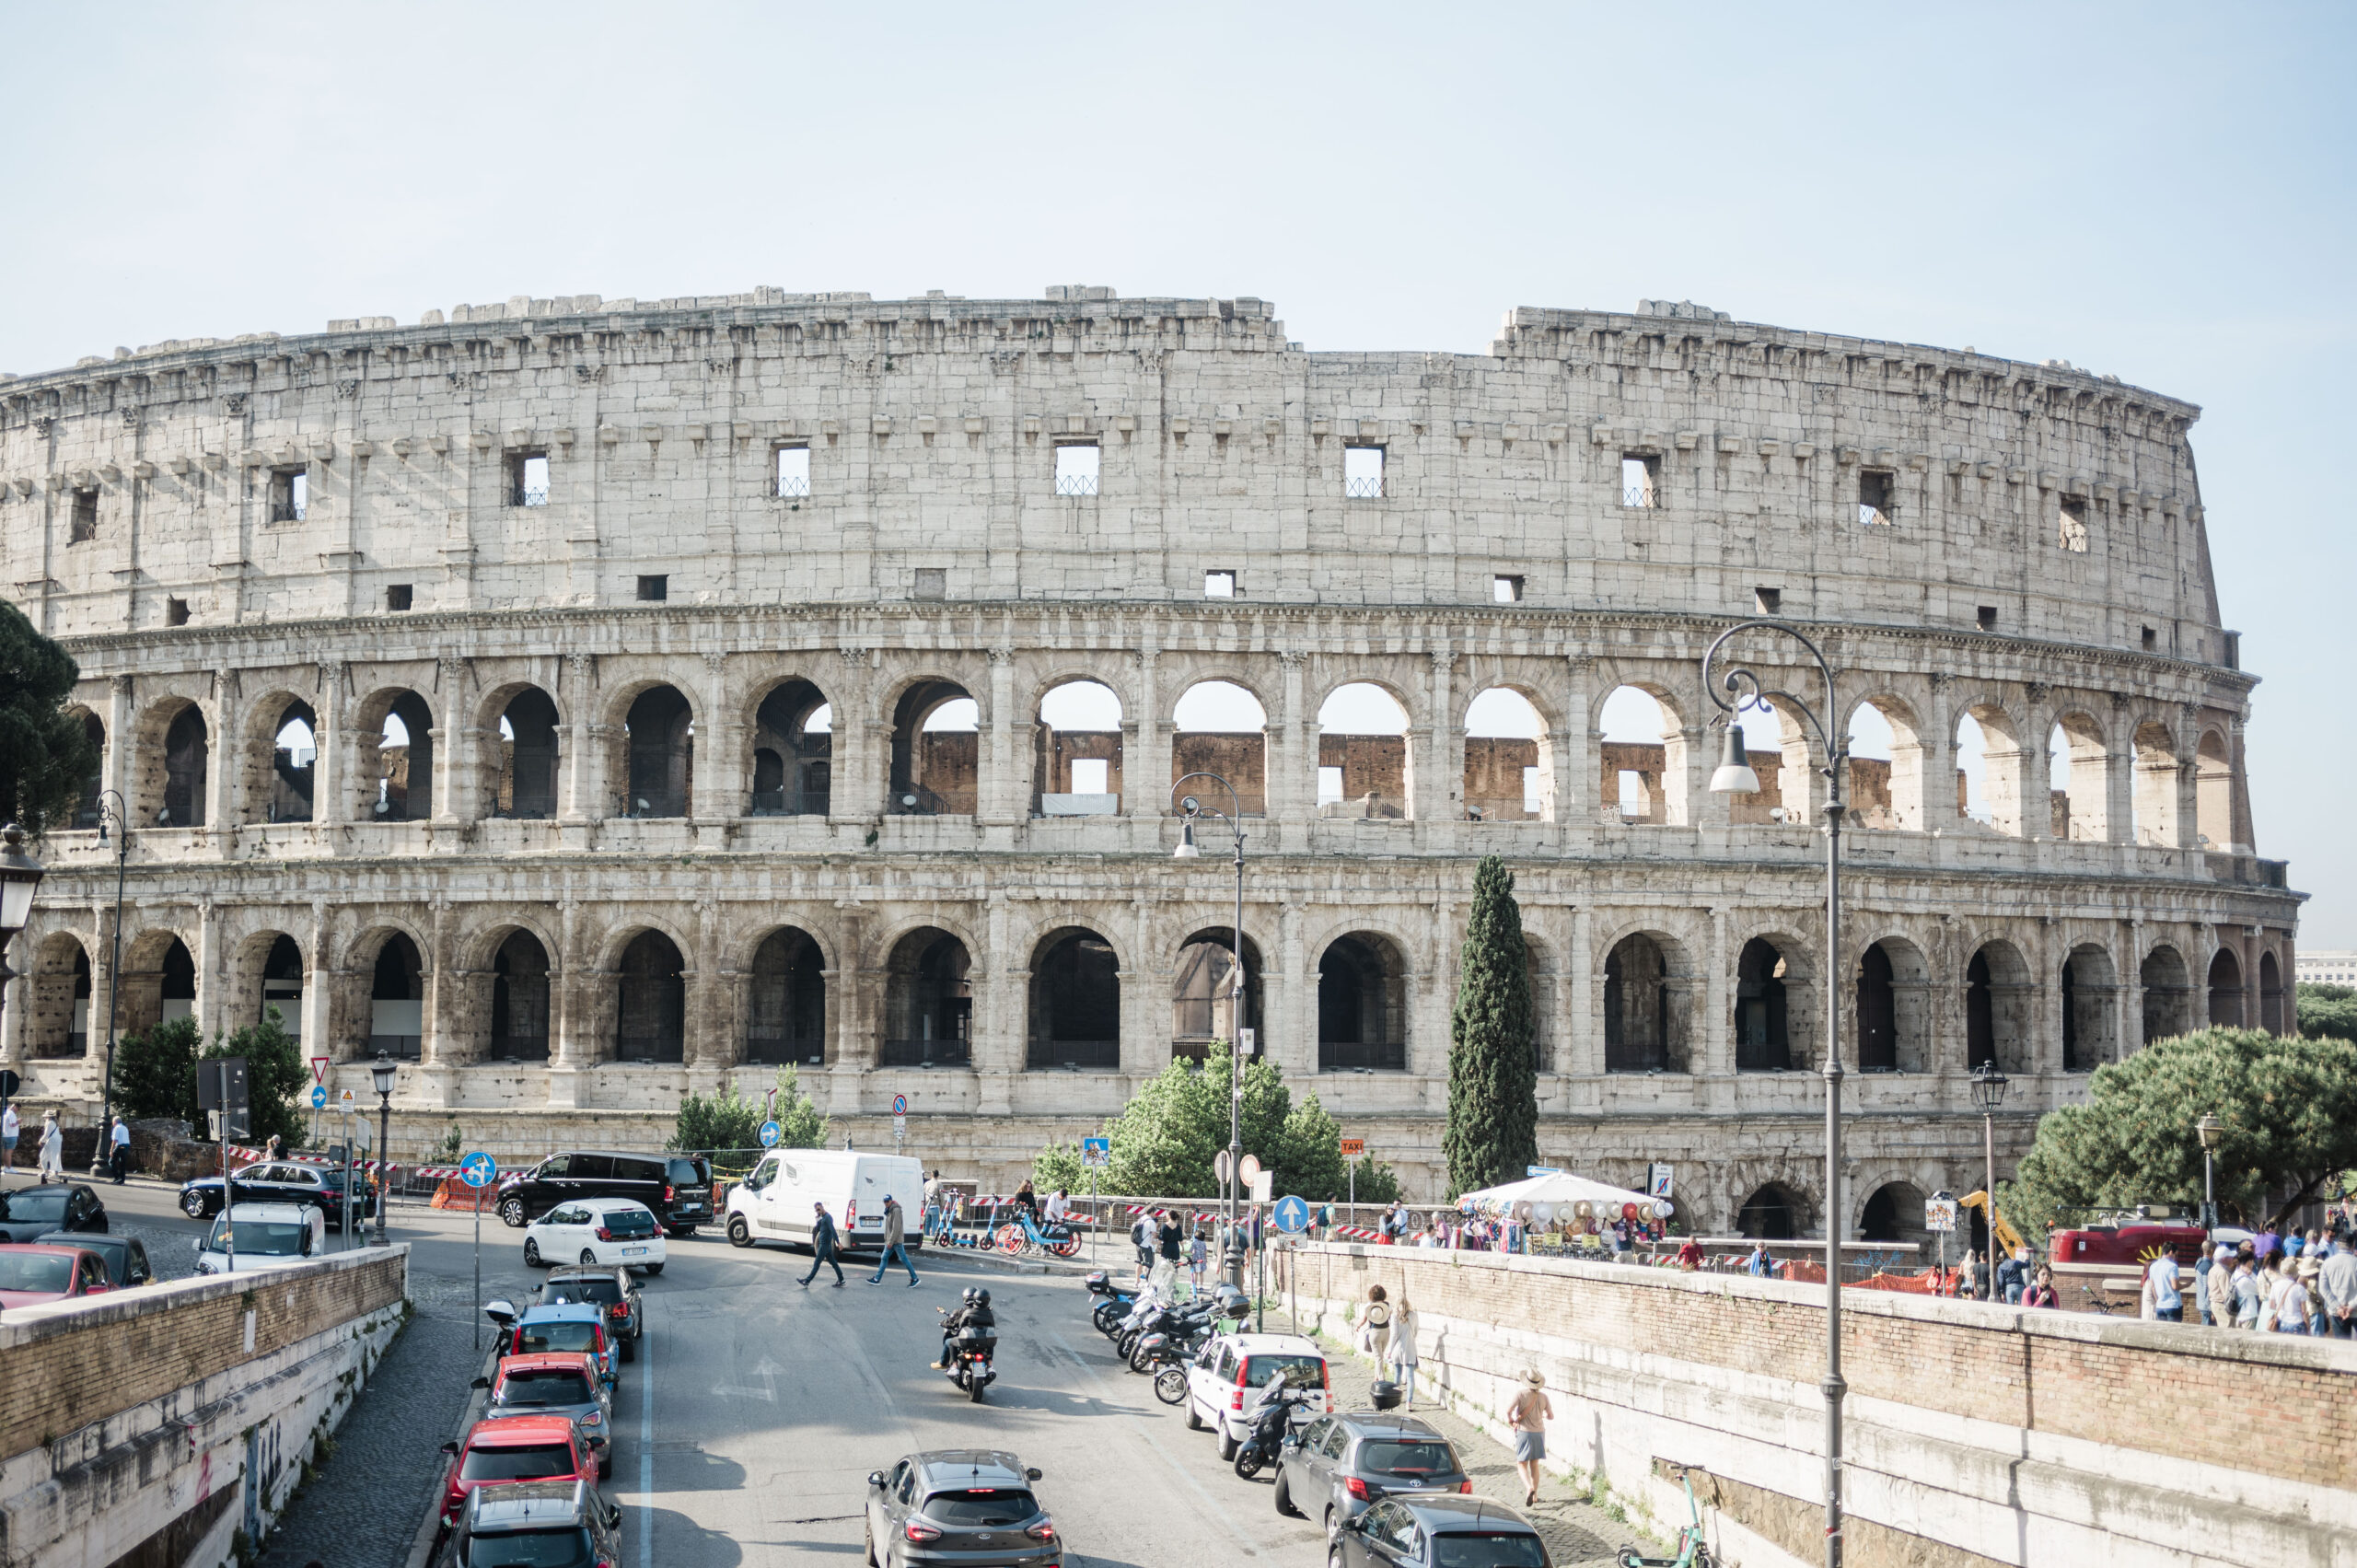 View of the Roman Colosseum in Rome, Italy, spend 36 hours in Rome